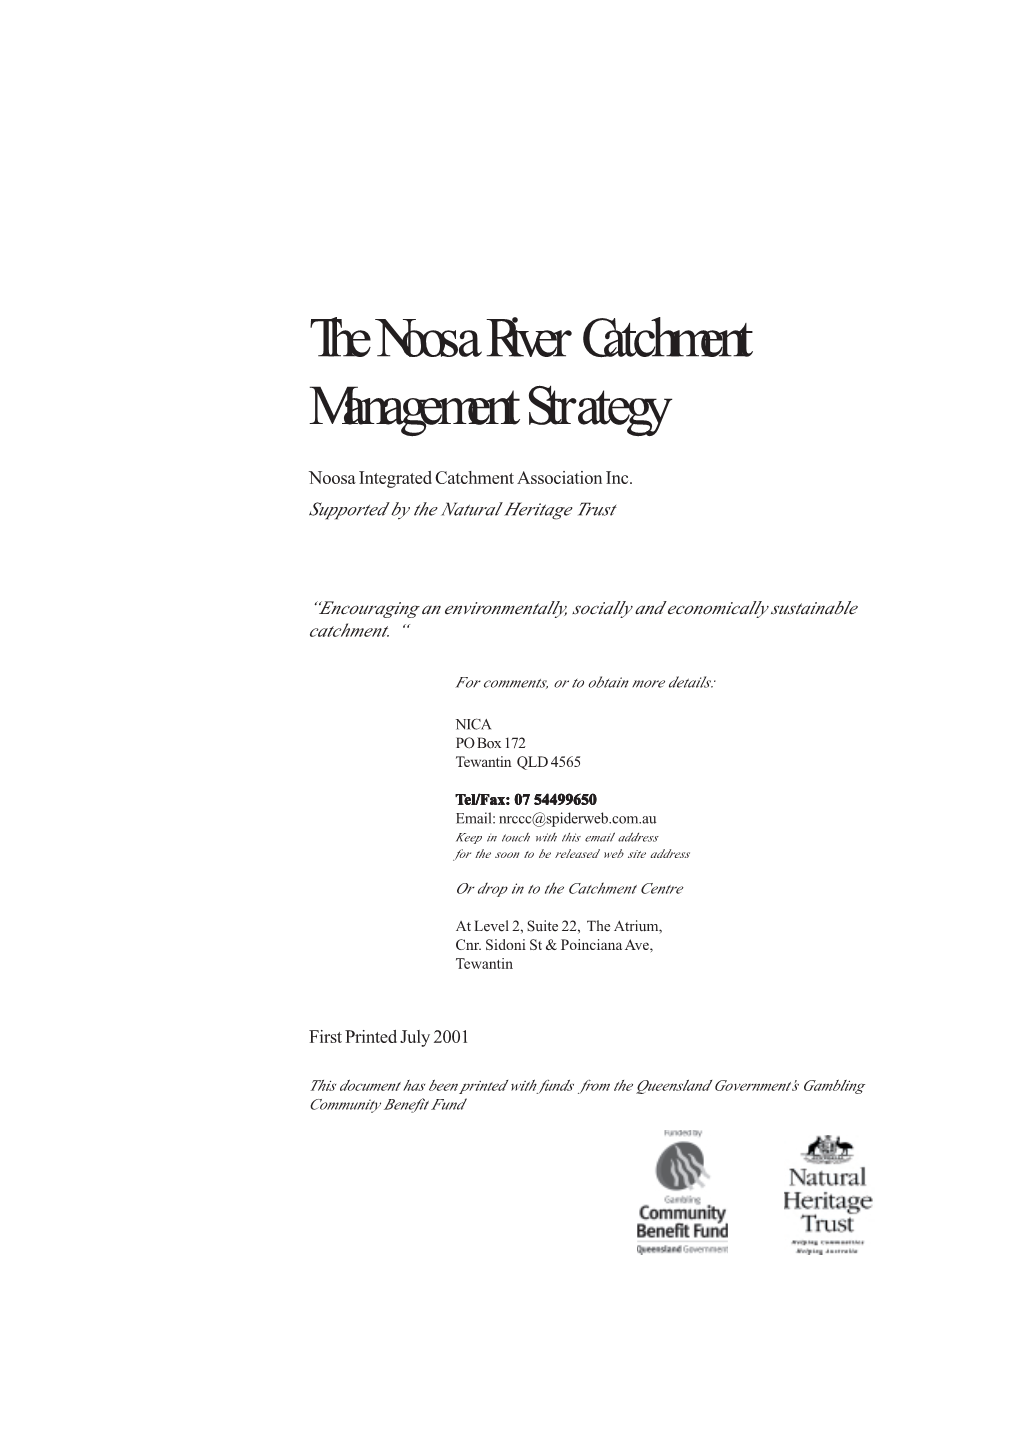 The Noosa River Catchment Management Strategy